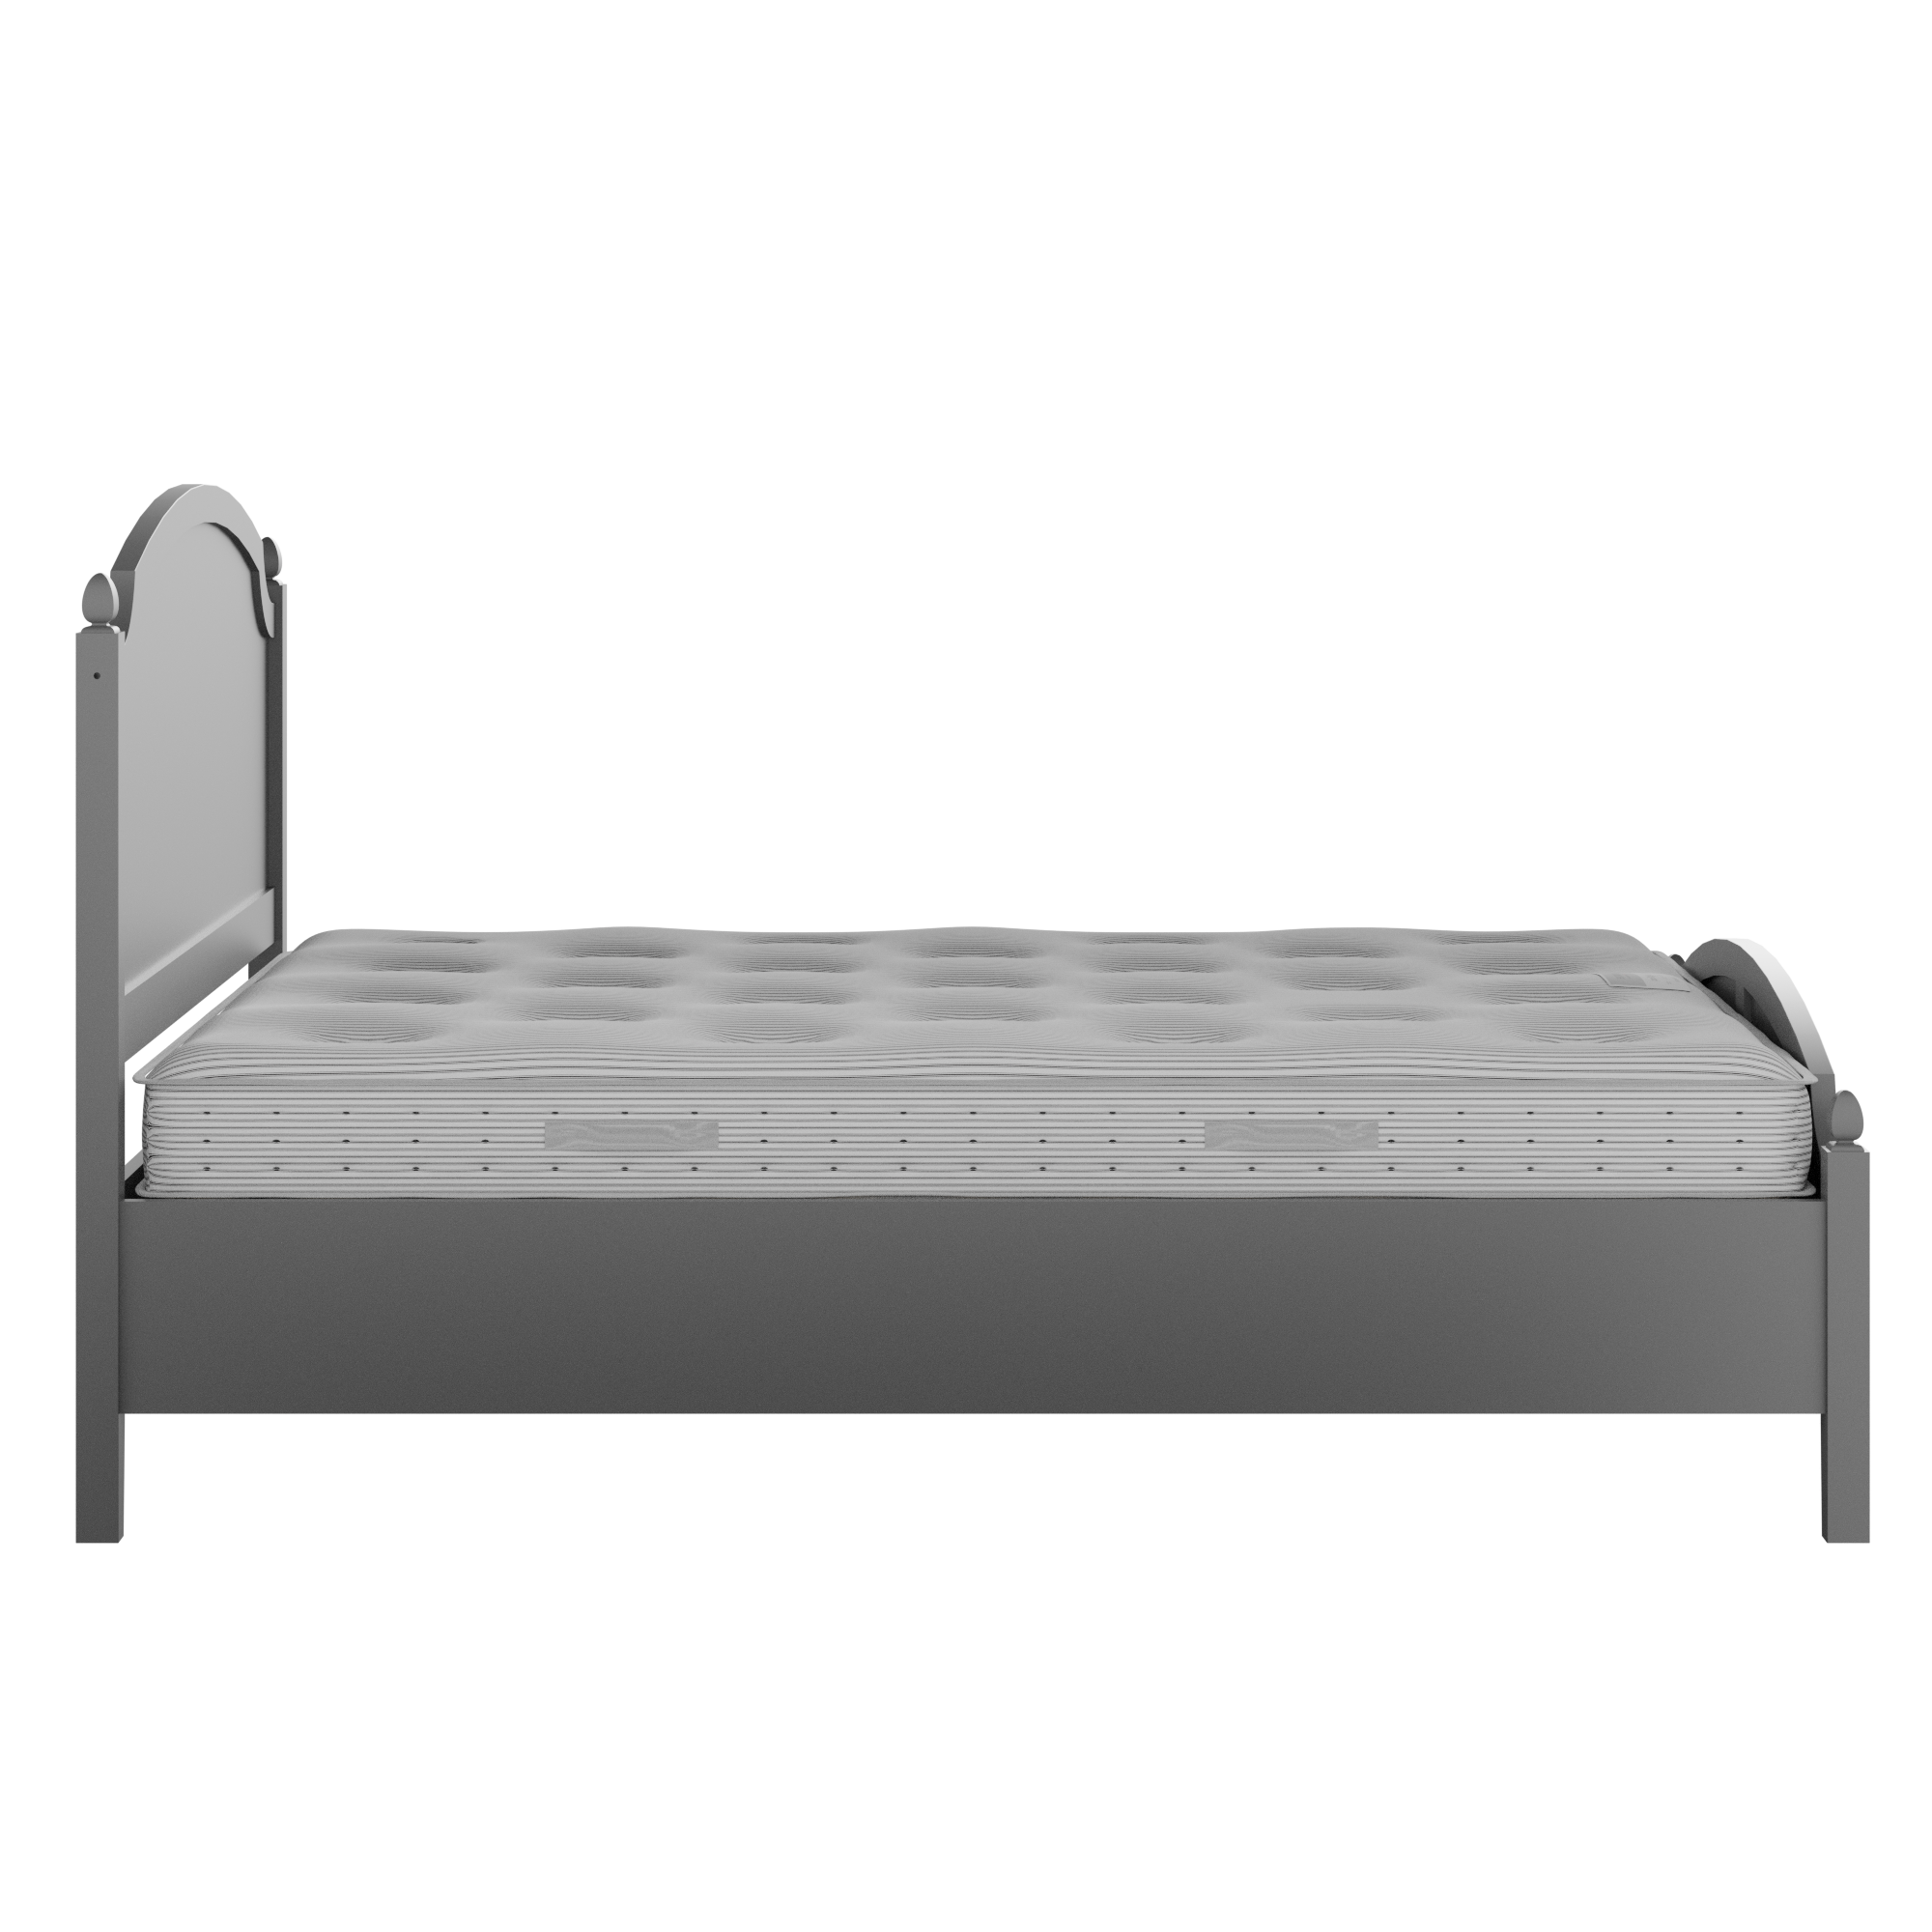 Kipling Low Footend Painted painted wood bed in grey with Juno mattress